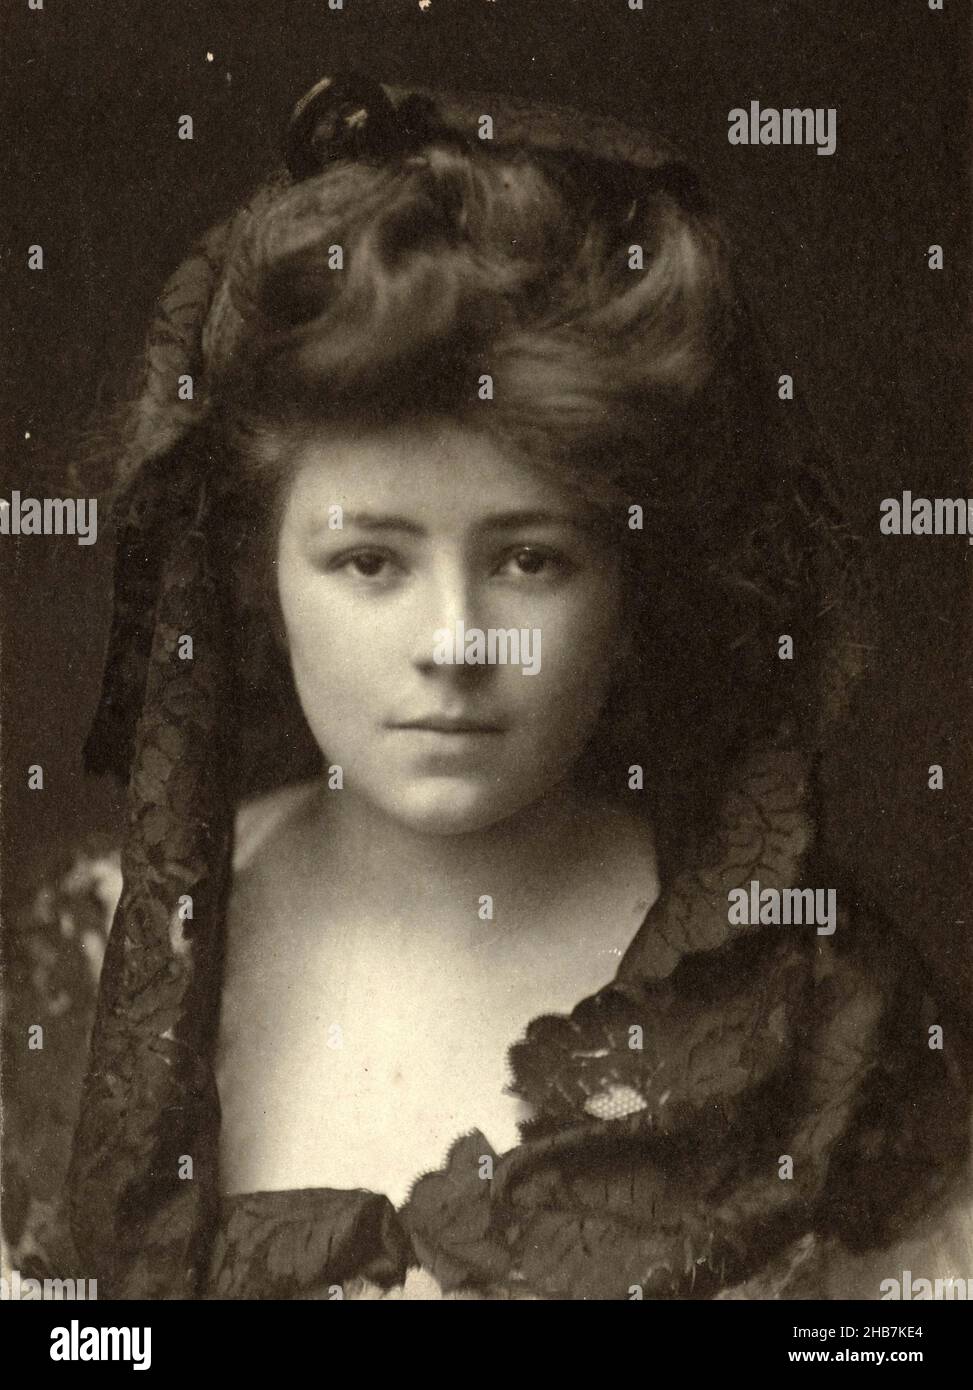 Portrait of an unknown young woman, M. Shadwell Clerke (mentioned on object), England, 1900 - 1914, photographic support, cardboard, height 231 mm × width 108 mmheight 144 mm × width 180 mm Stock Photo